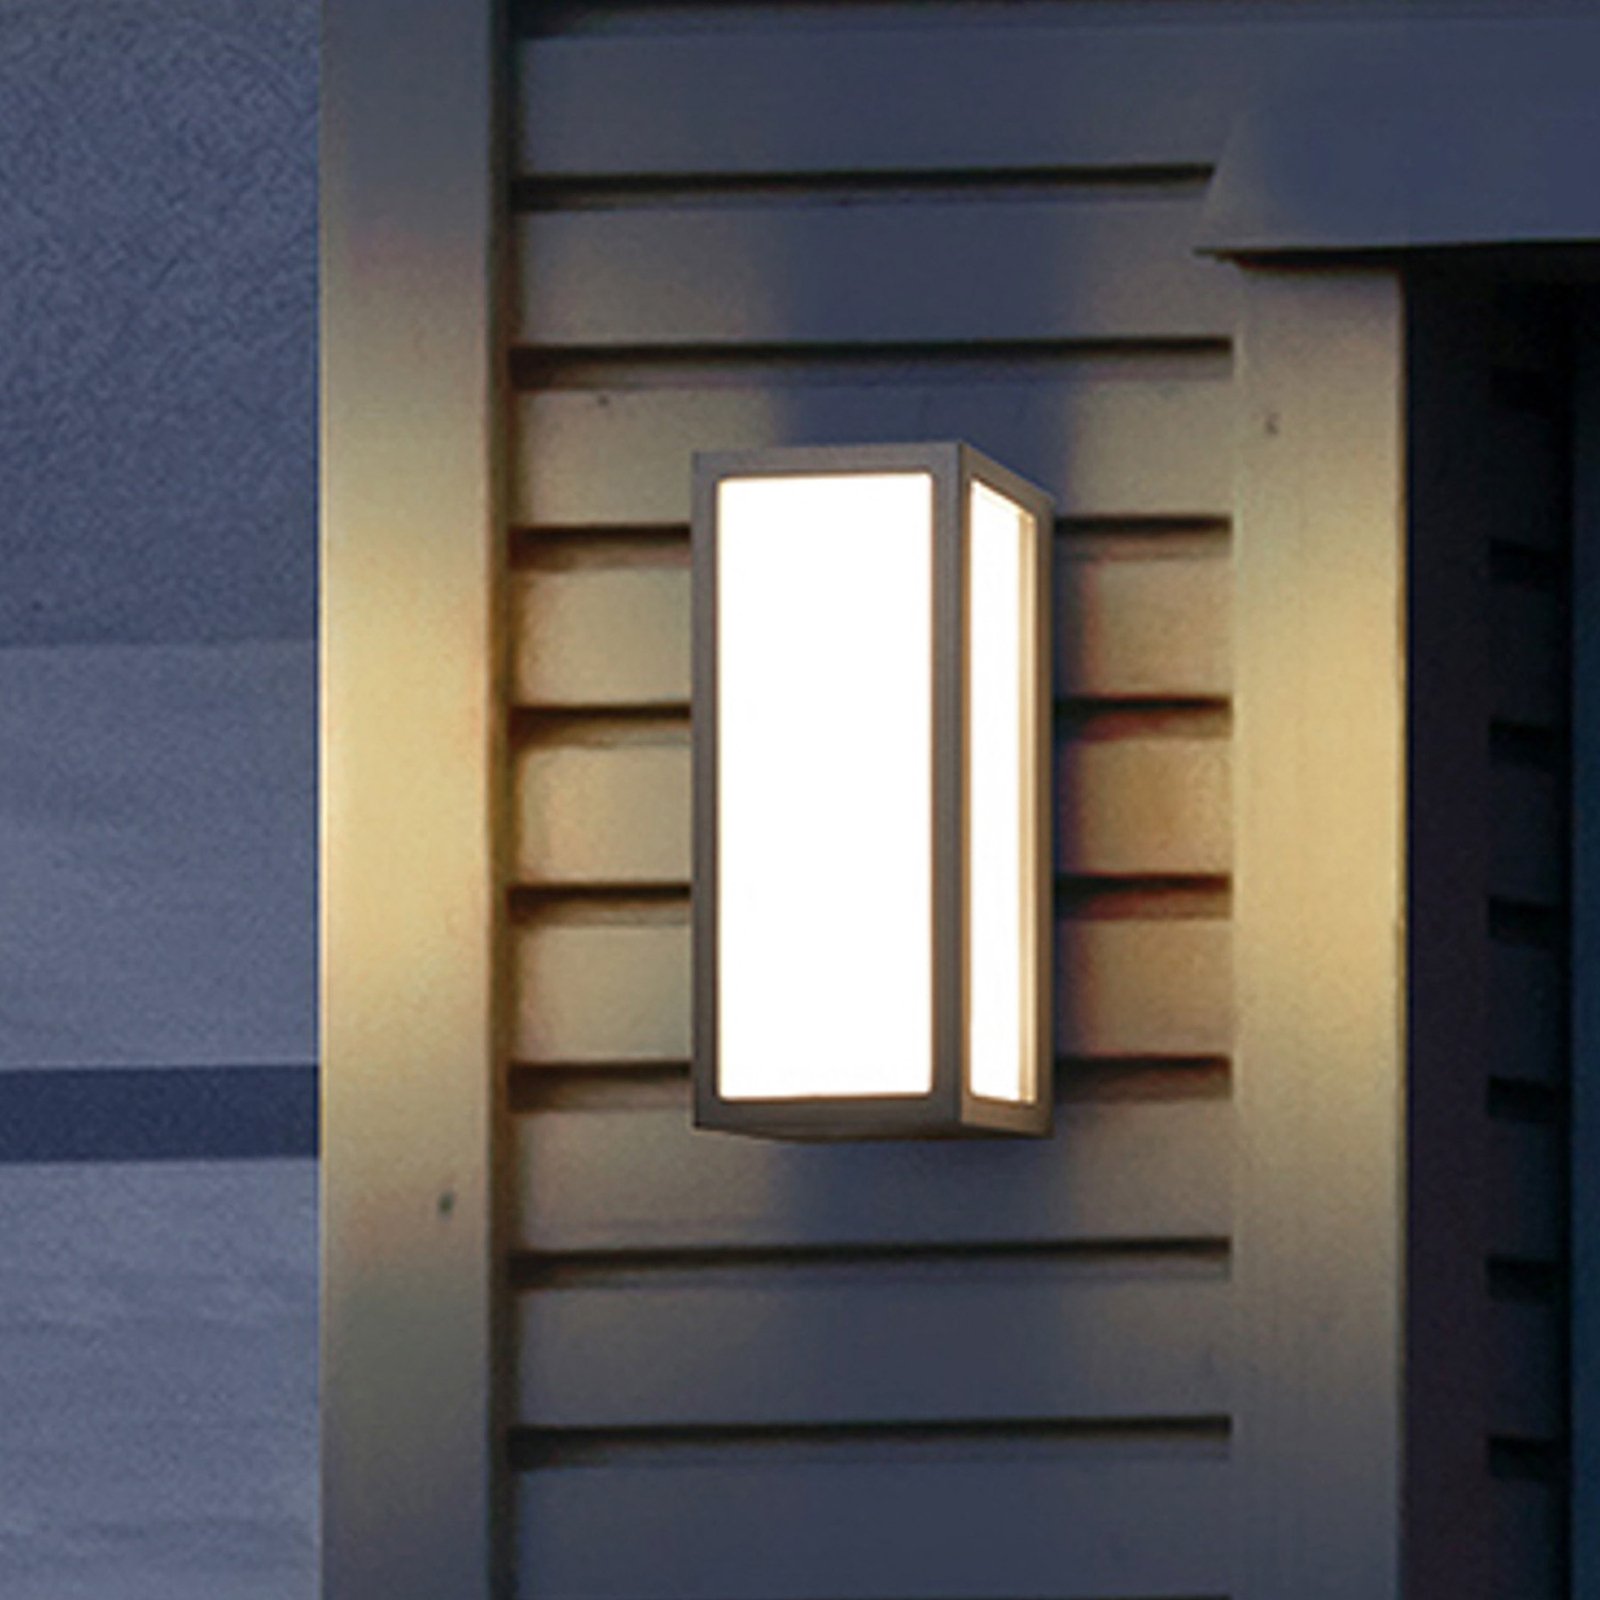 RZB HB 101 LED outdoor wall light frontal/side